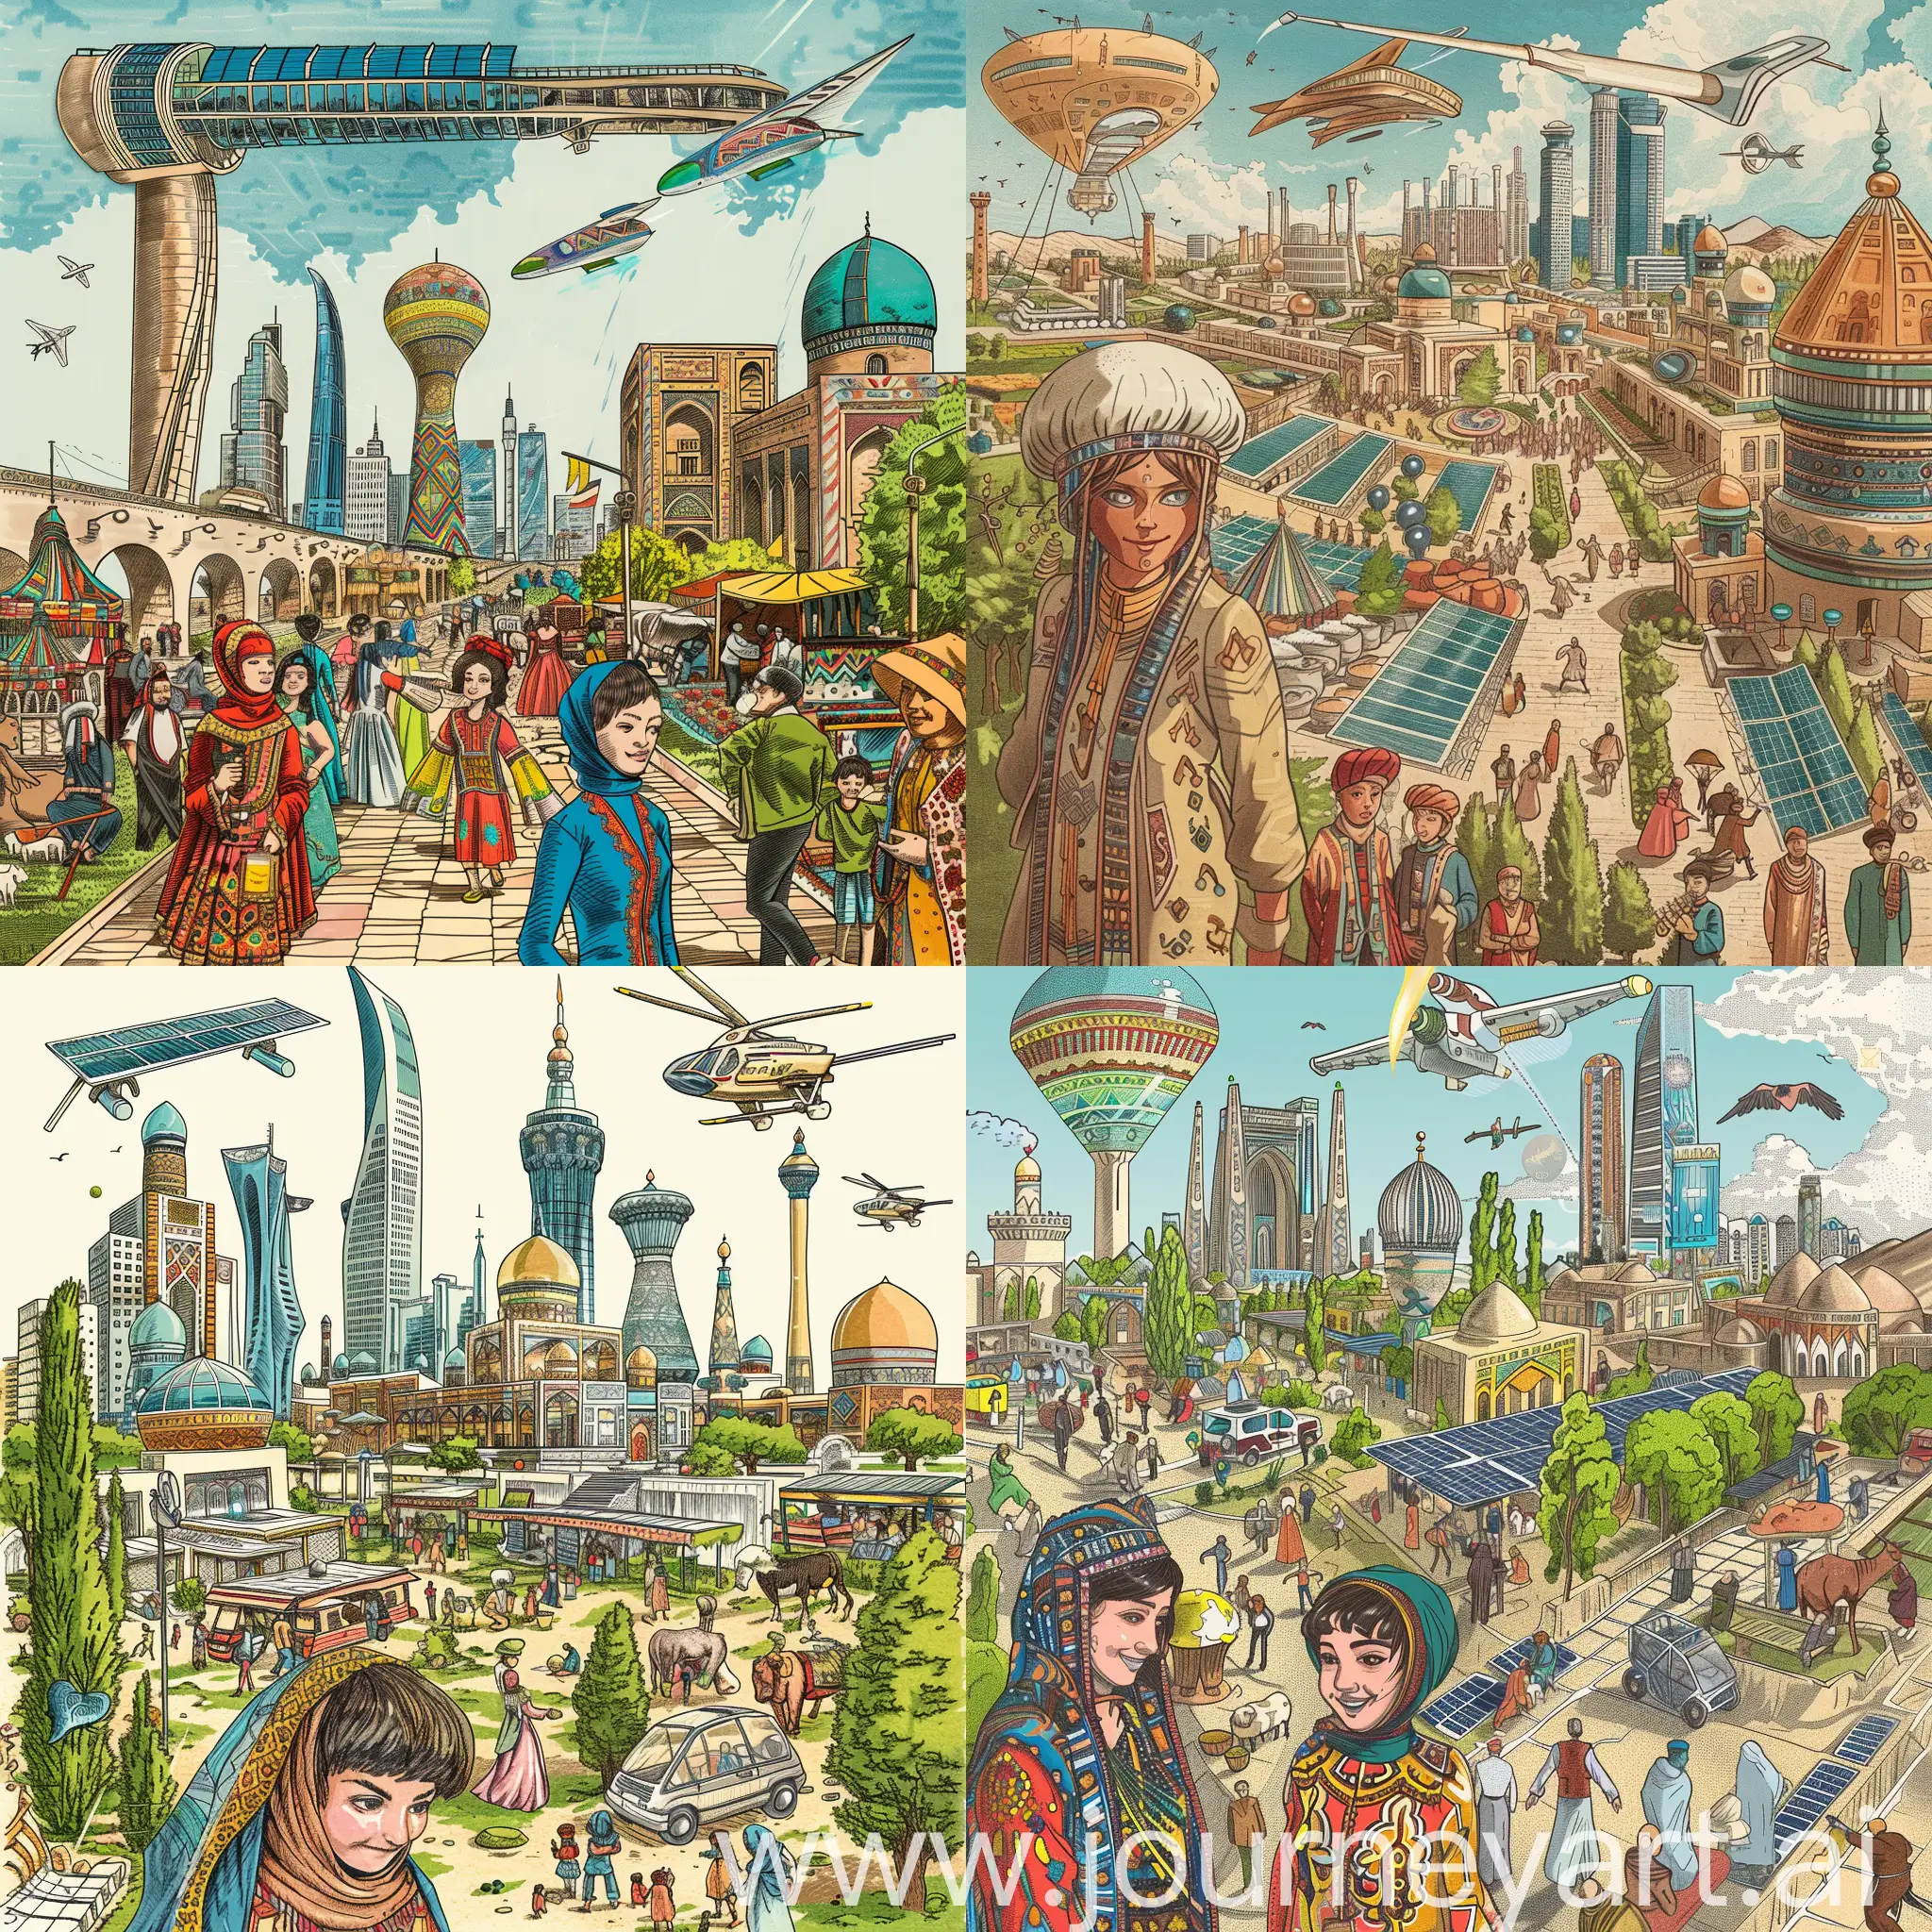 You could draw a futuristic cityscape of Tashkent, the capital and largest city of Uzbekistan, with skyscrapers, solar panels, flying cars, and a monorail system. You could also show some traditional elements, such as the Kukeldash Madrasah, the Chorsu Bazaar, and the Amir Timur Museum, to contrast the old and the new. You could draw a scene of a rural village in Uzbekistan, with people wearing colorful national costumes and performing folk dances or music. You could also show some aspects of the agricultural sector, such as cotton fields, orchards, or livestock. You could also include some symbols of the Uzbek culture, such as the khumus (a musical instrument), the suzani (an embroidered textile), or the plov (a rice dish). You could draw a portrait of a young Uzbek person, who represents the future generation of the country. You could show their hopes and dreams, as well as their challenges and opportunities. You could also show some features of their identity, such as their ethnicity, religion, education, or profession. You could also include some accessories or objects that reflect their interests or hobbies.